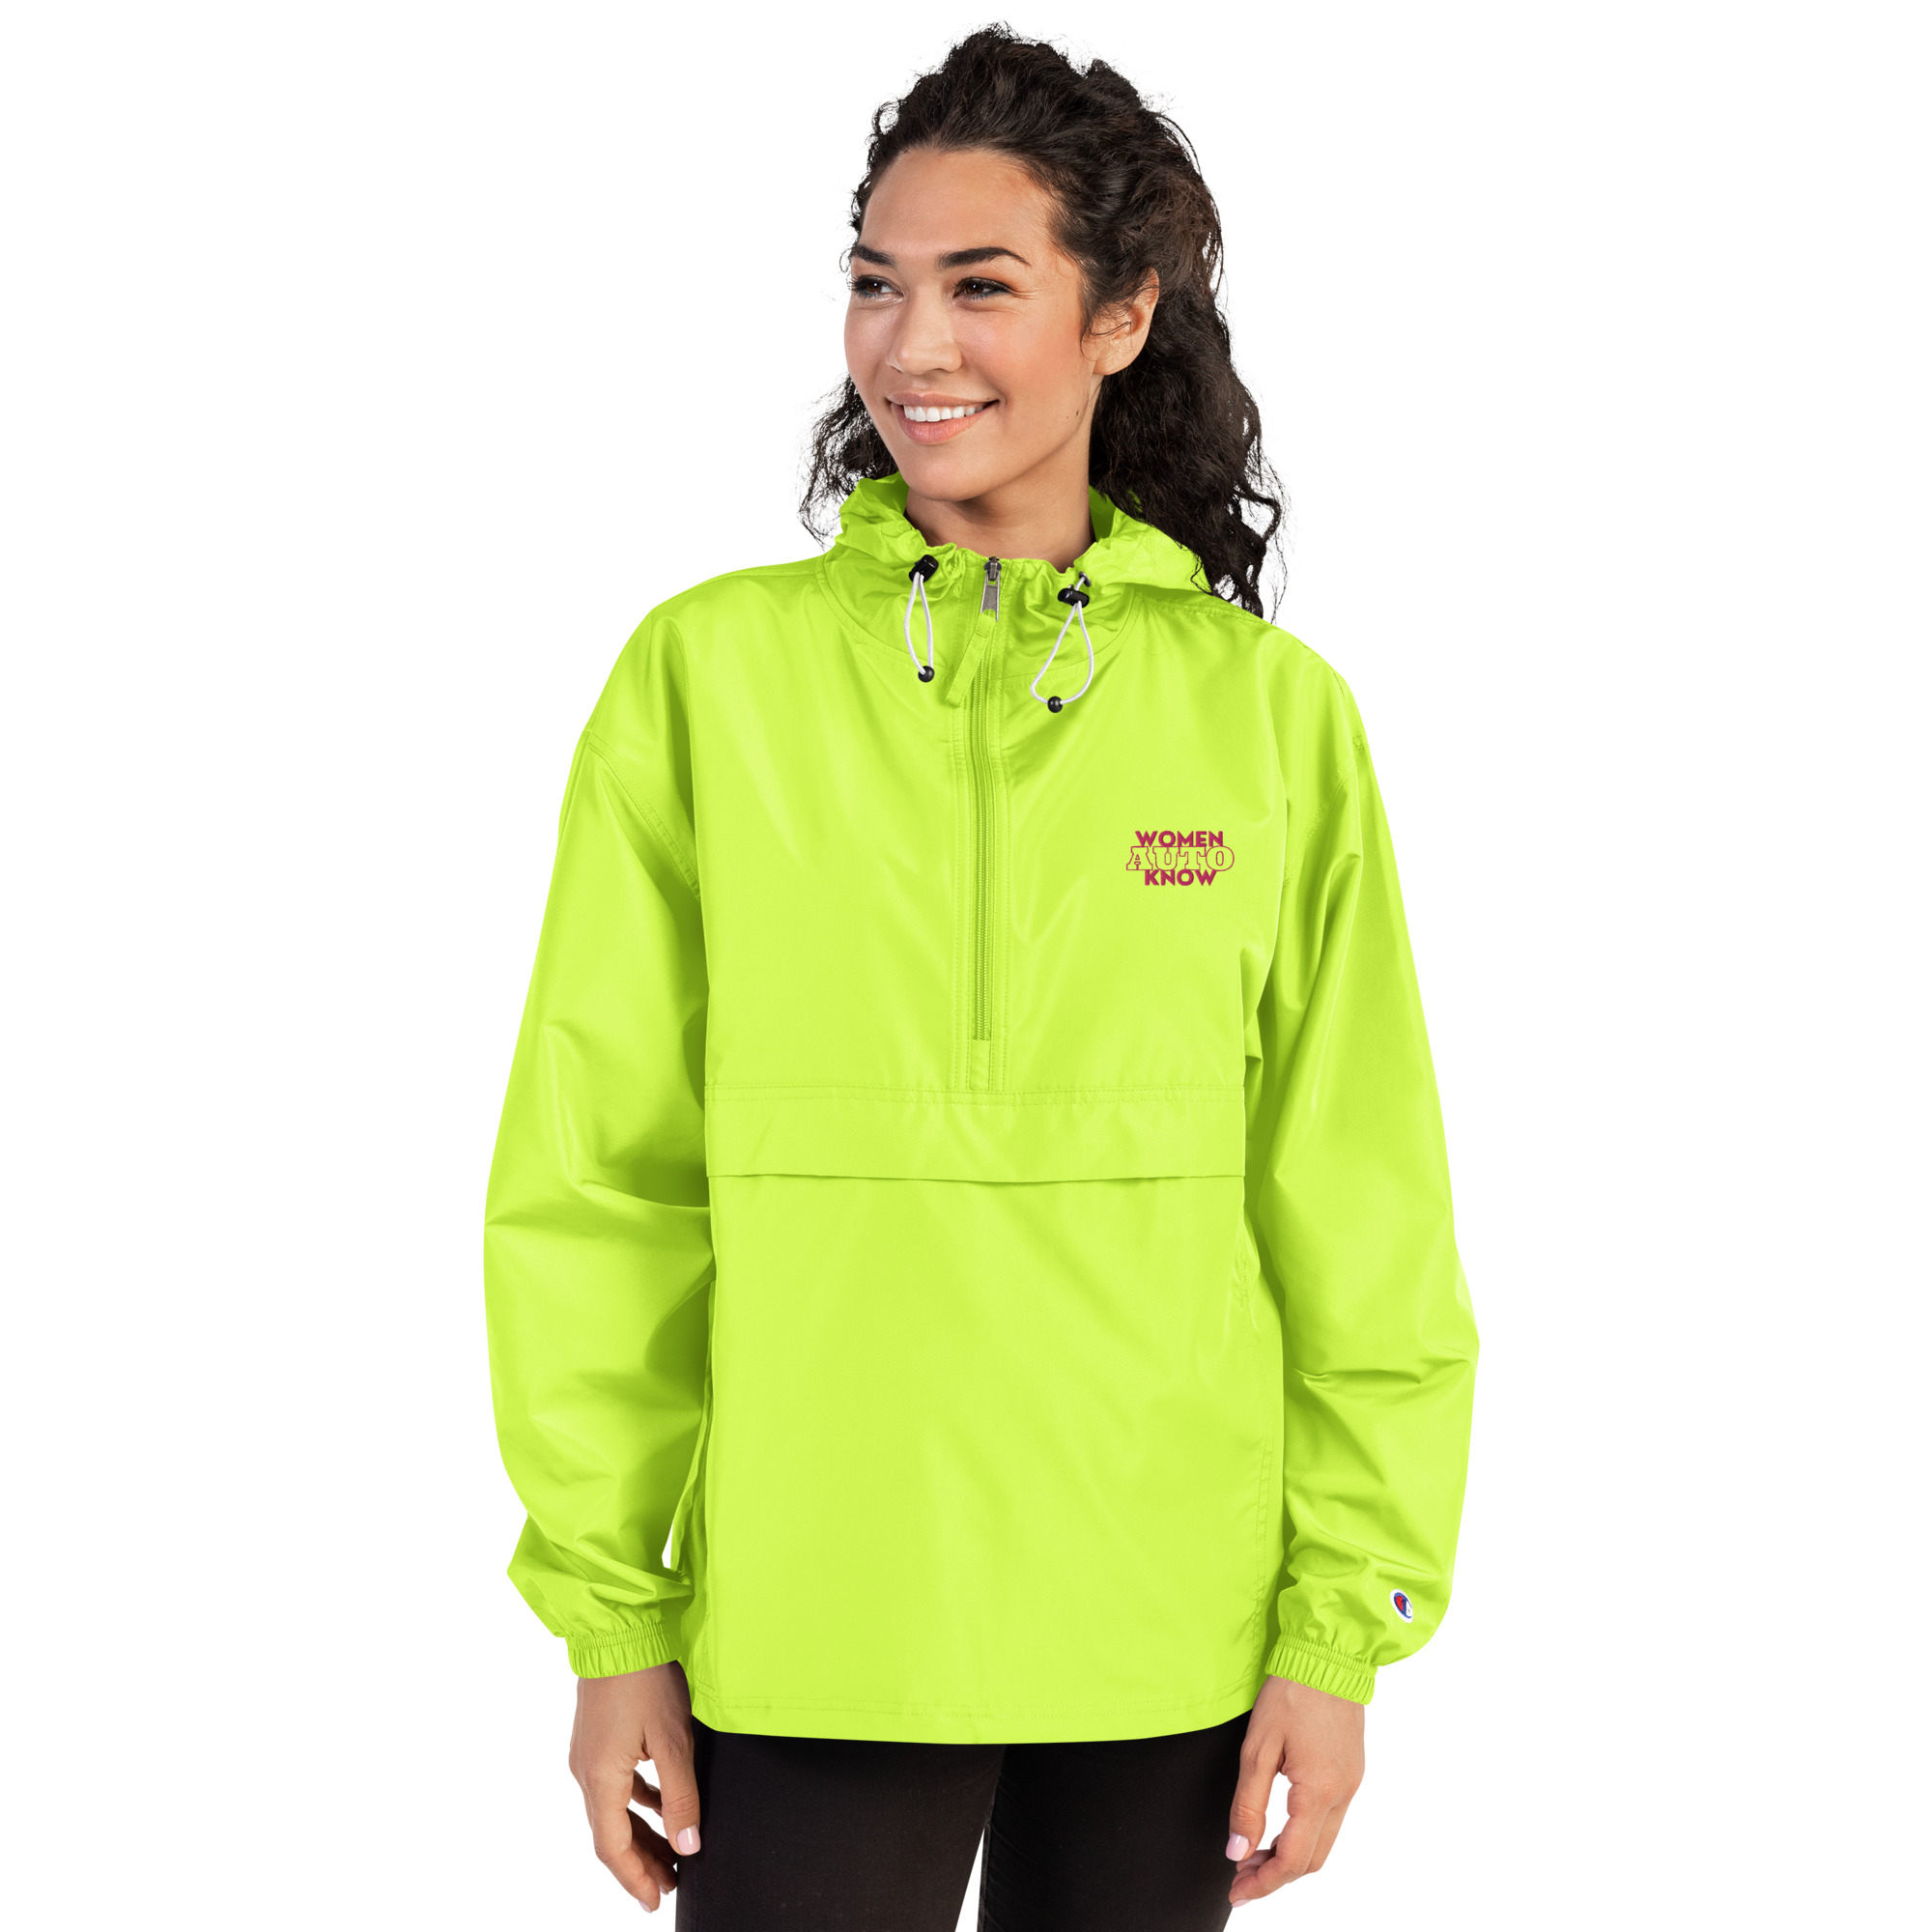 Embroidered Champion Packable Jacket - Women Auto Know